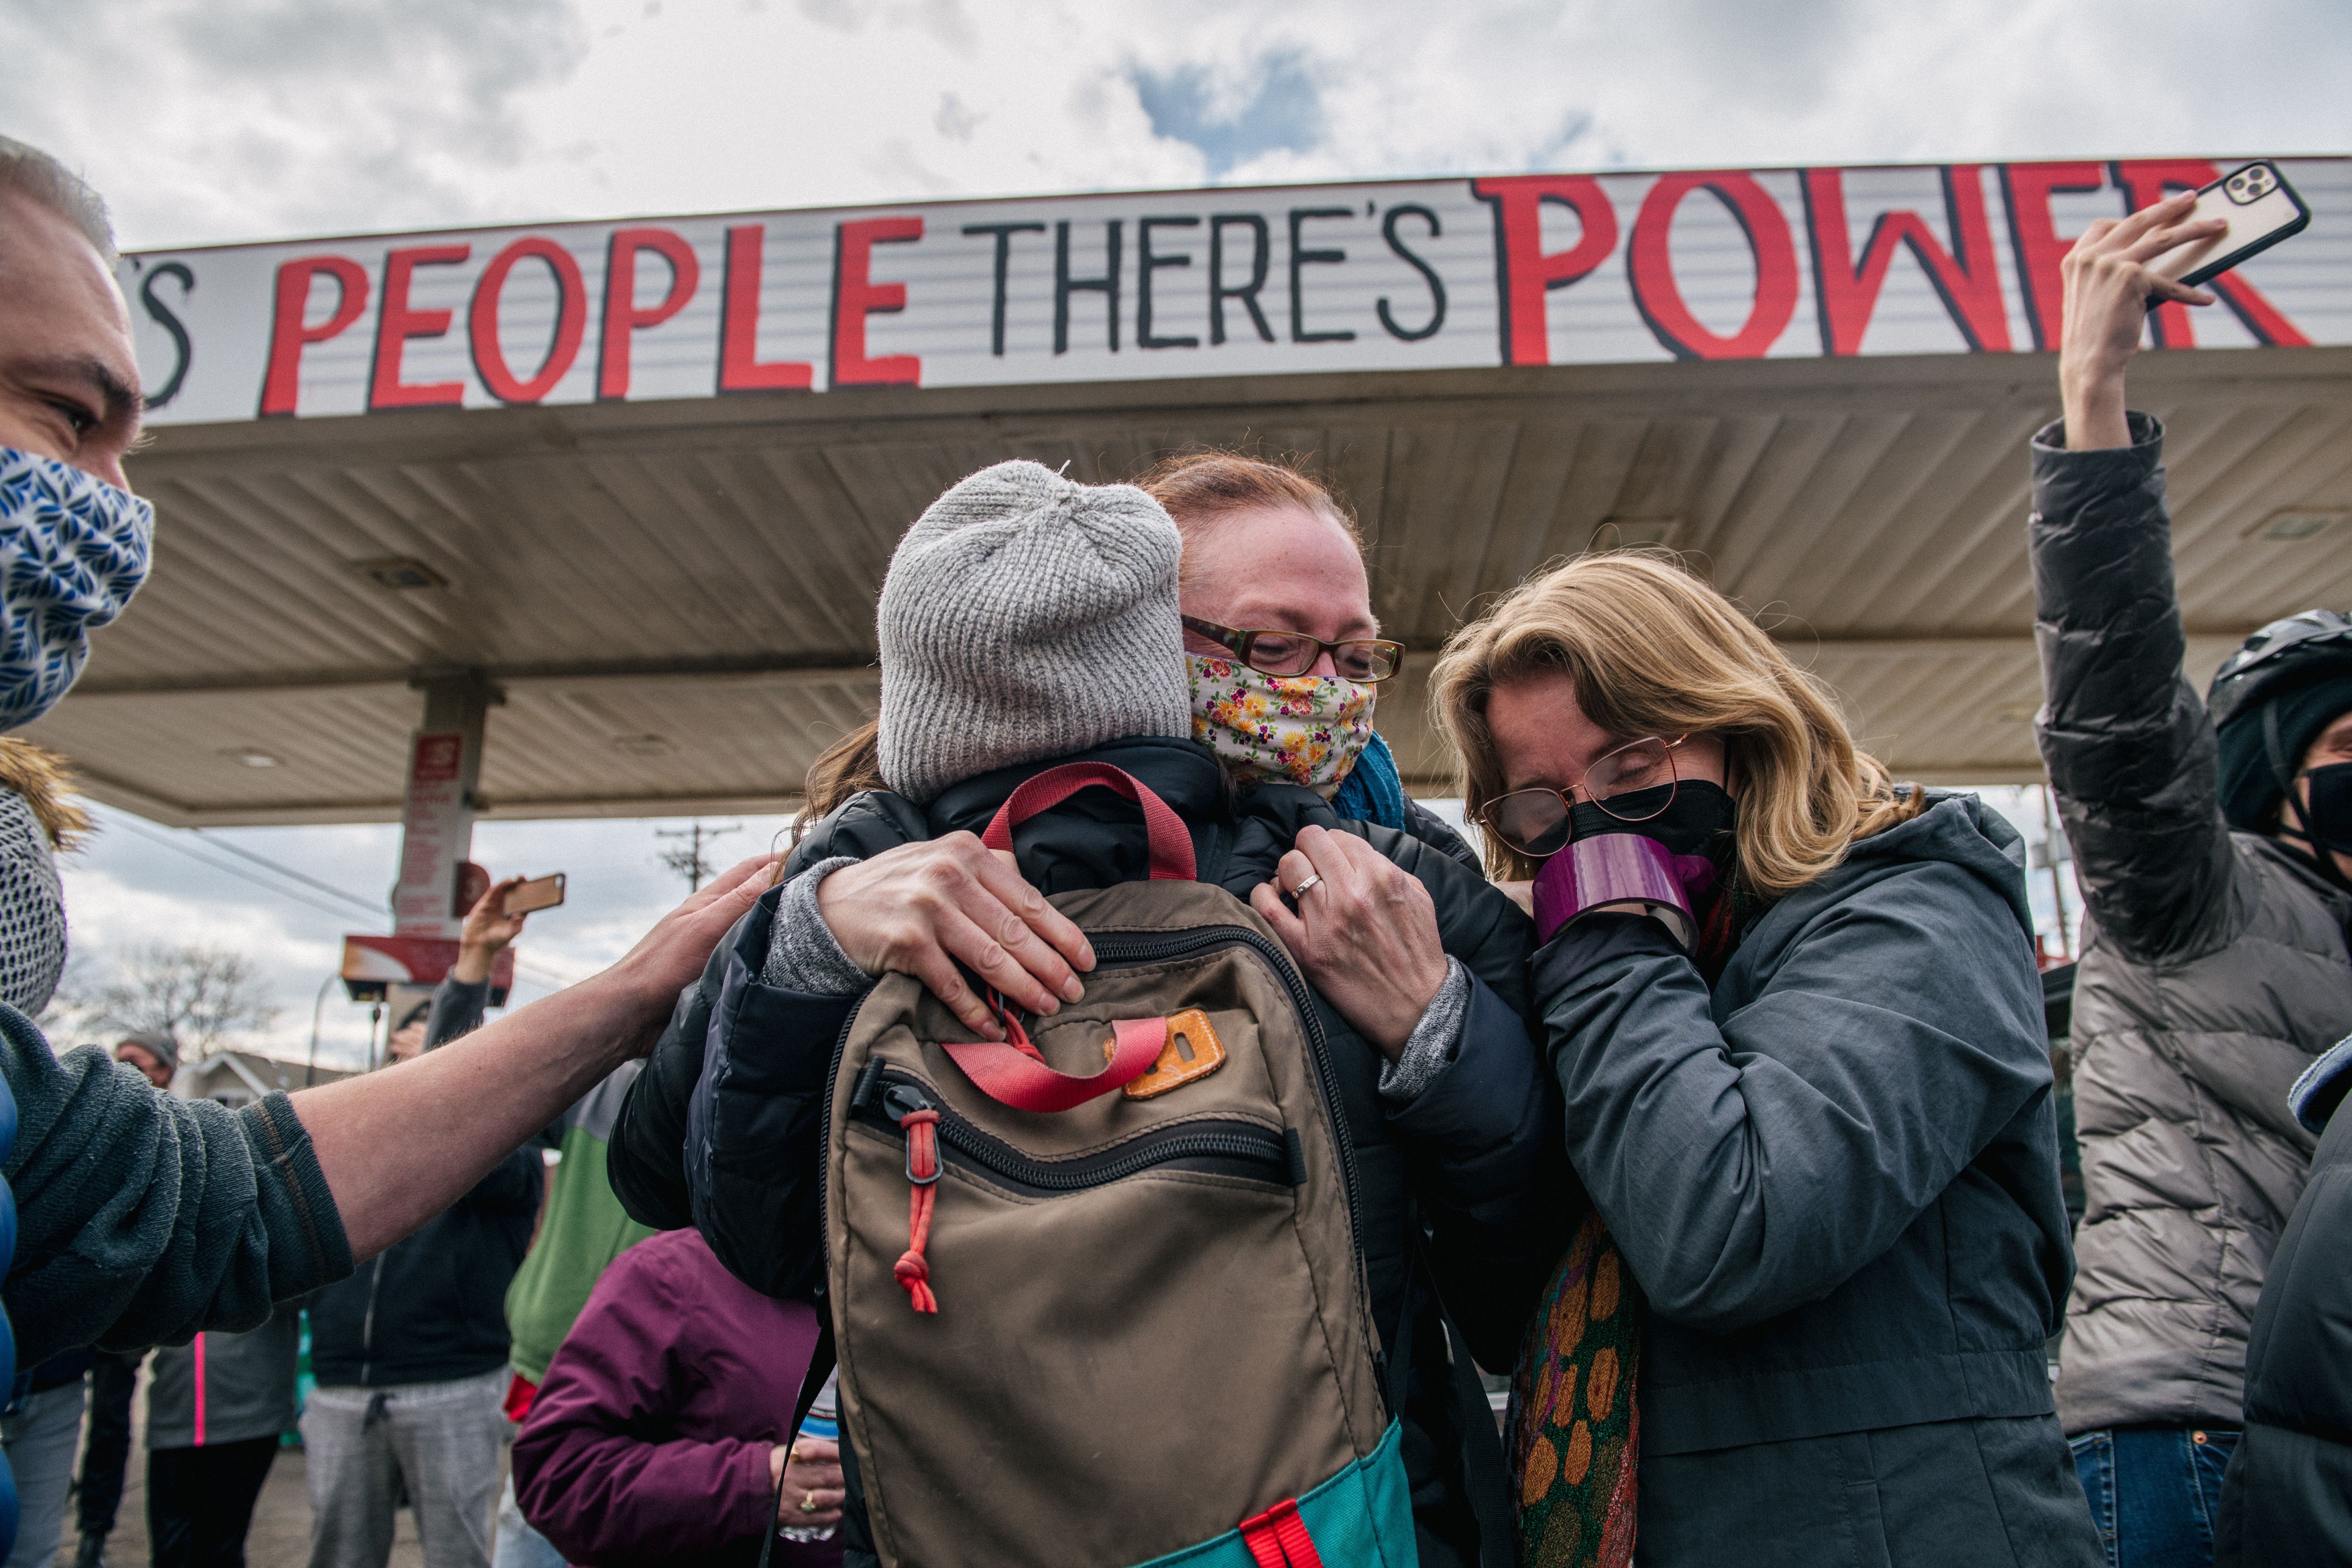 People celebrate the guilty verdict in the Dereck Chauvin trail at the intersection of 38th Street and Chicago Avenue on April 20, 2021 in Minneapolis, Minnesota.